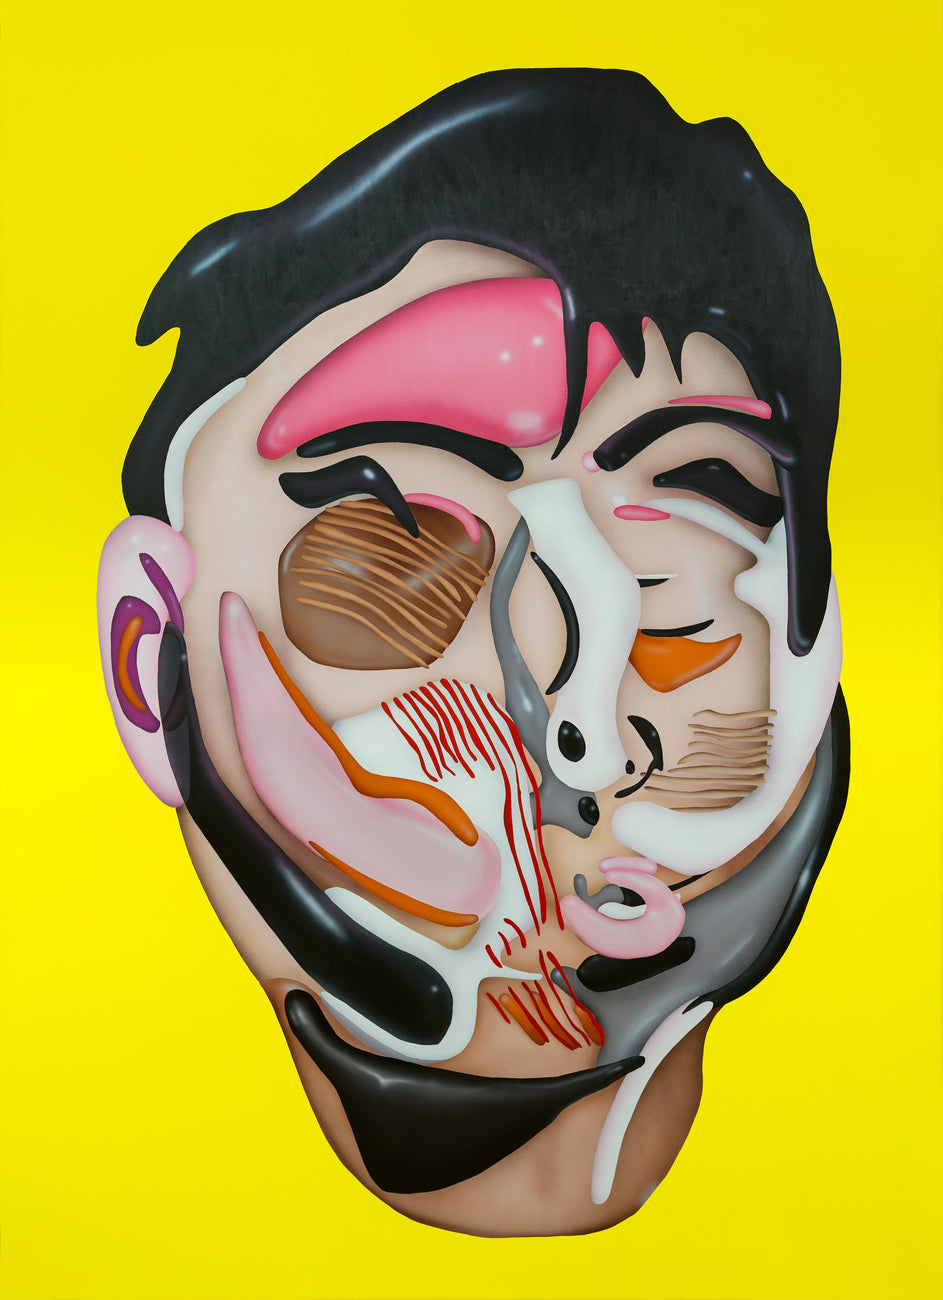 HEAD STUDY FROM THE LOBSTER LAND MUSEUM (YELLOW), PHILIP COLBERT, 2019Panel, Canvas, Oil, Acrylic200.0 × 145.0 × 4.5 cm